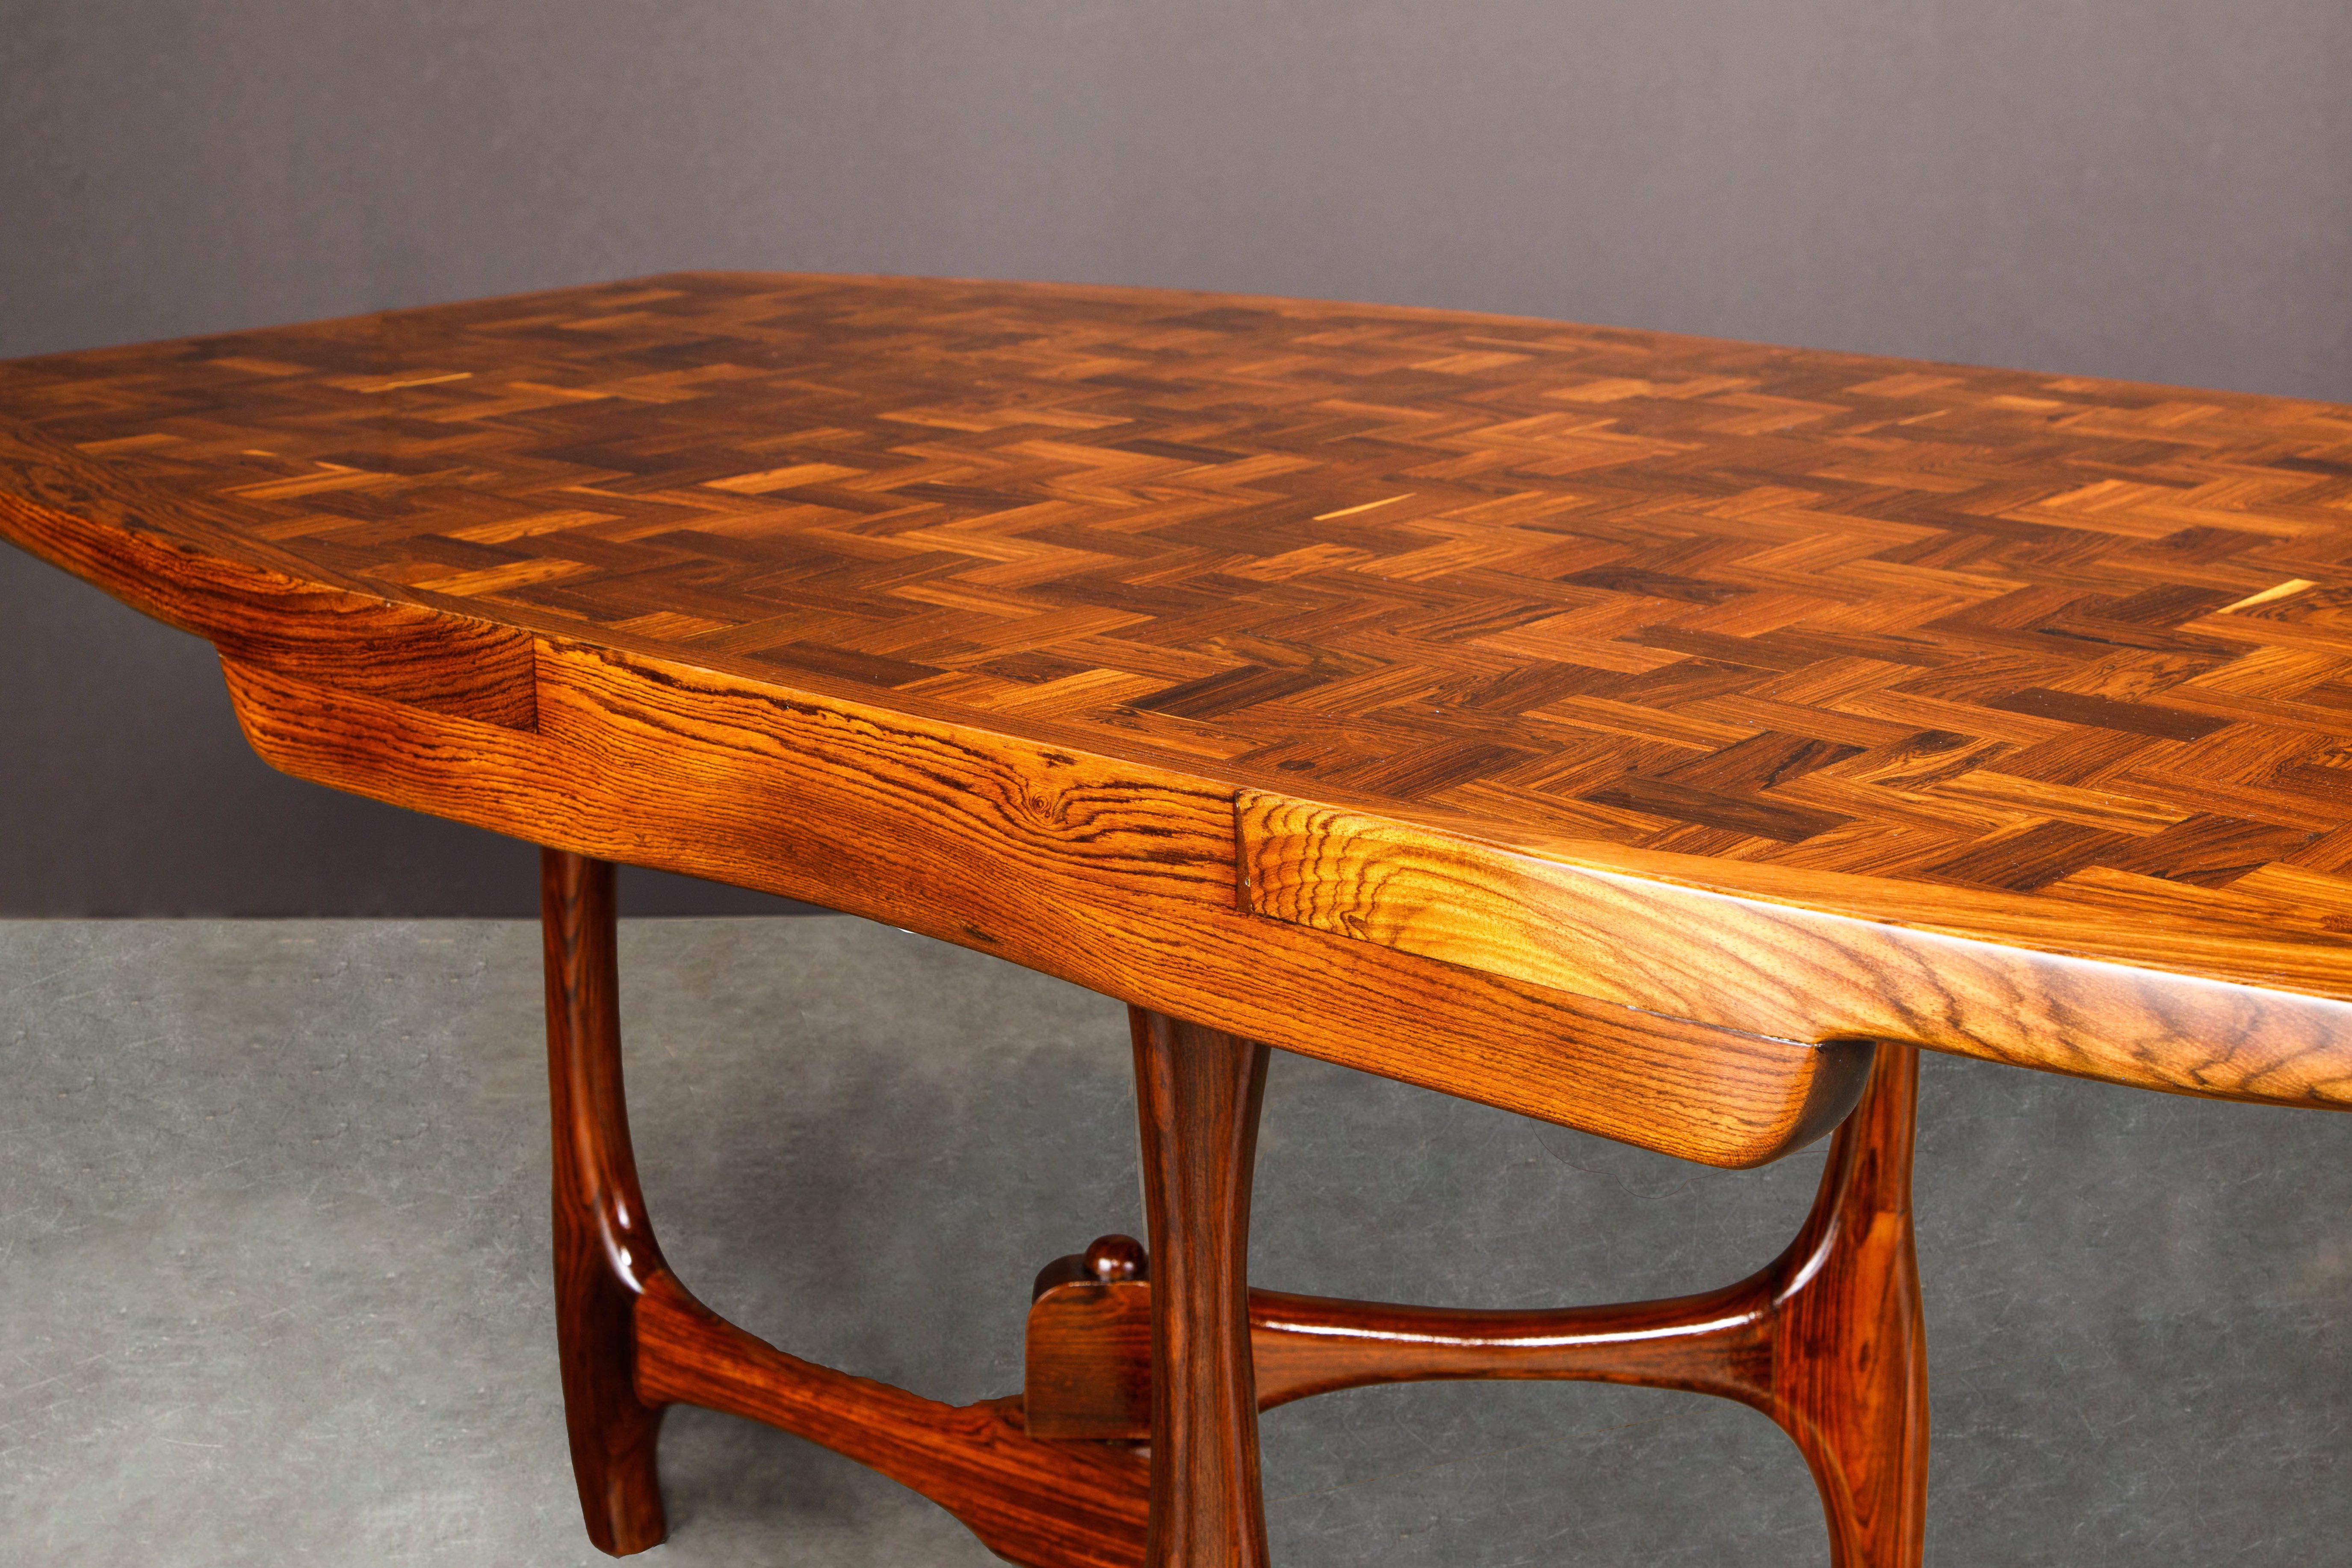 Mid-20th Century Rare Exotic Cocobolo Rosewood Dining Table by Don Shoemaker for Senal, Signed